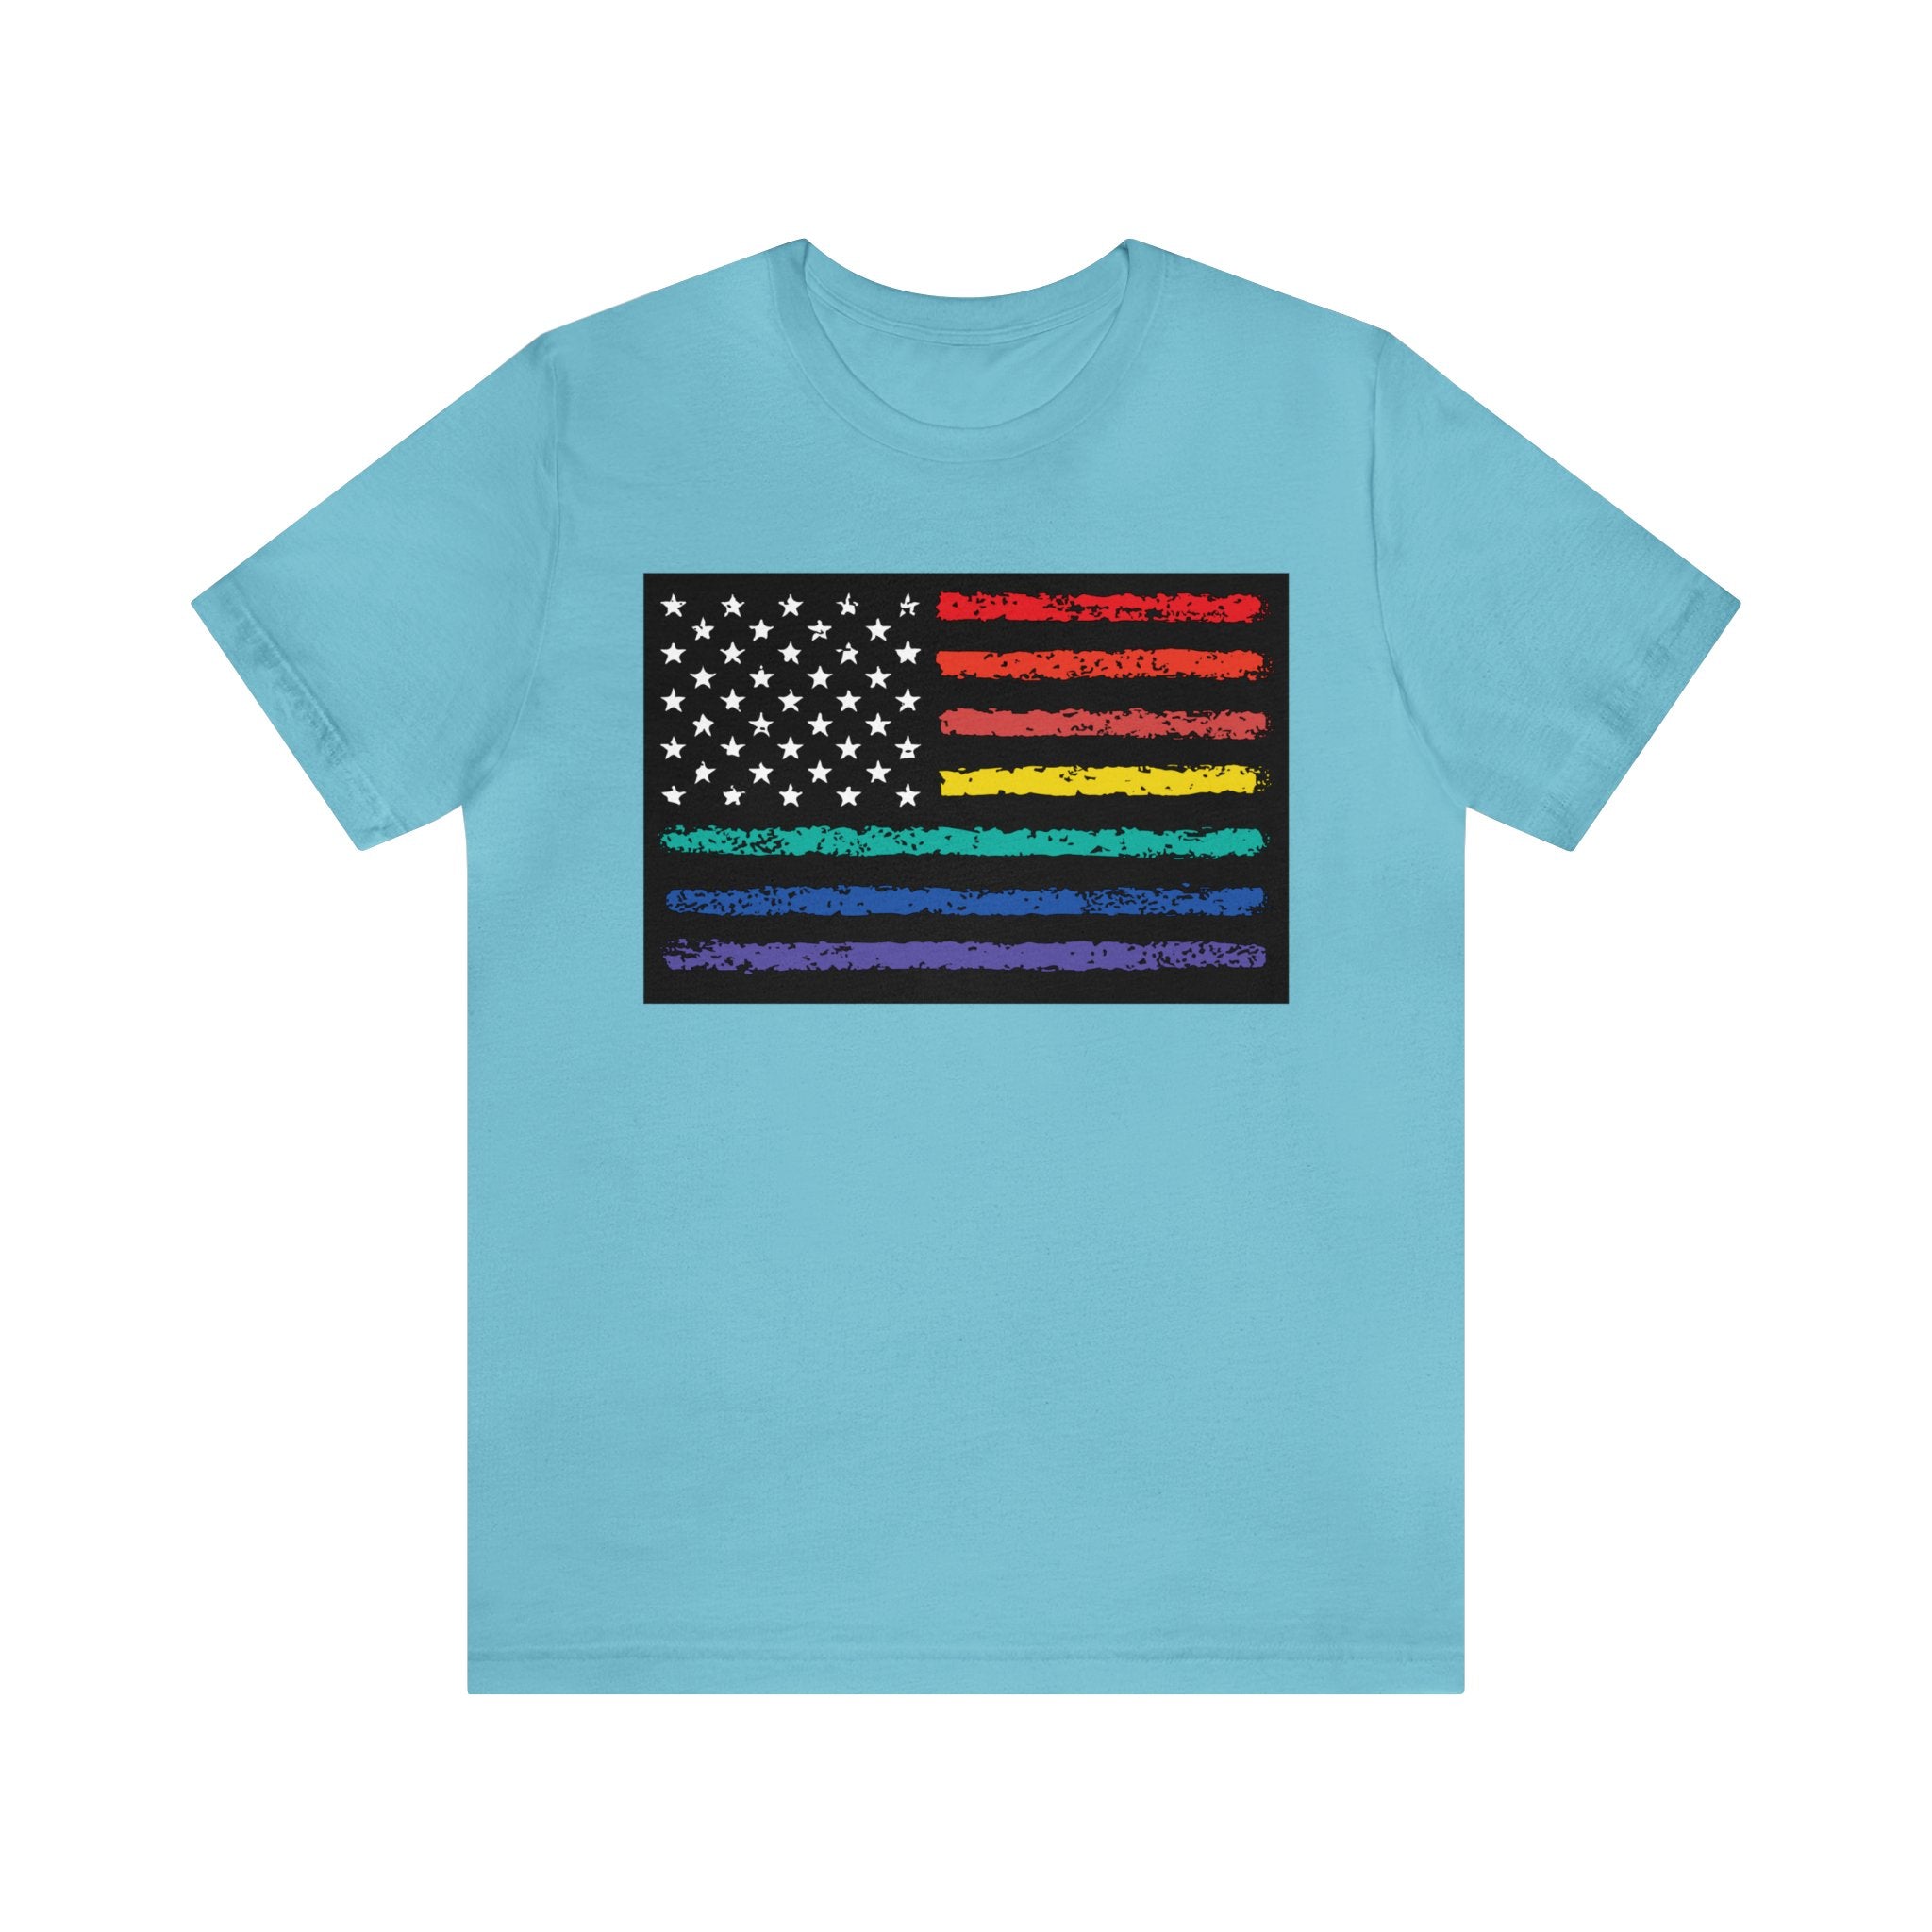 Black Friday America! : Unisex 100% Comfy Cotton, T-Shirt by Bella+Canvas